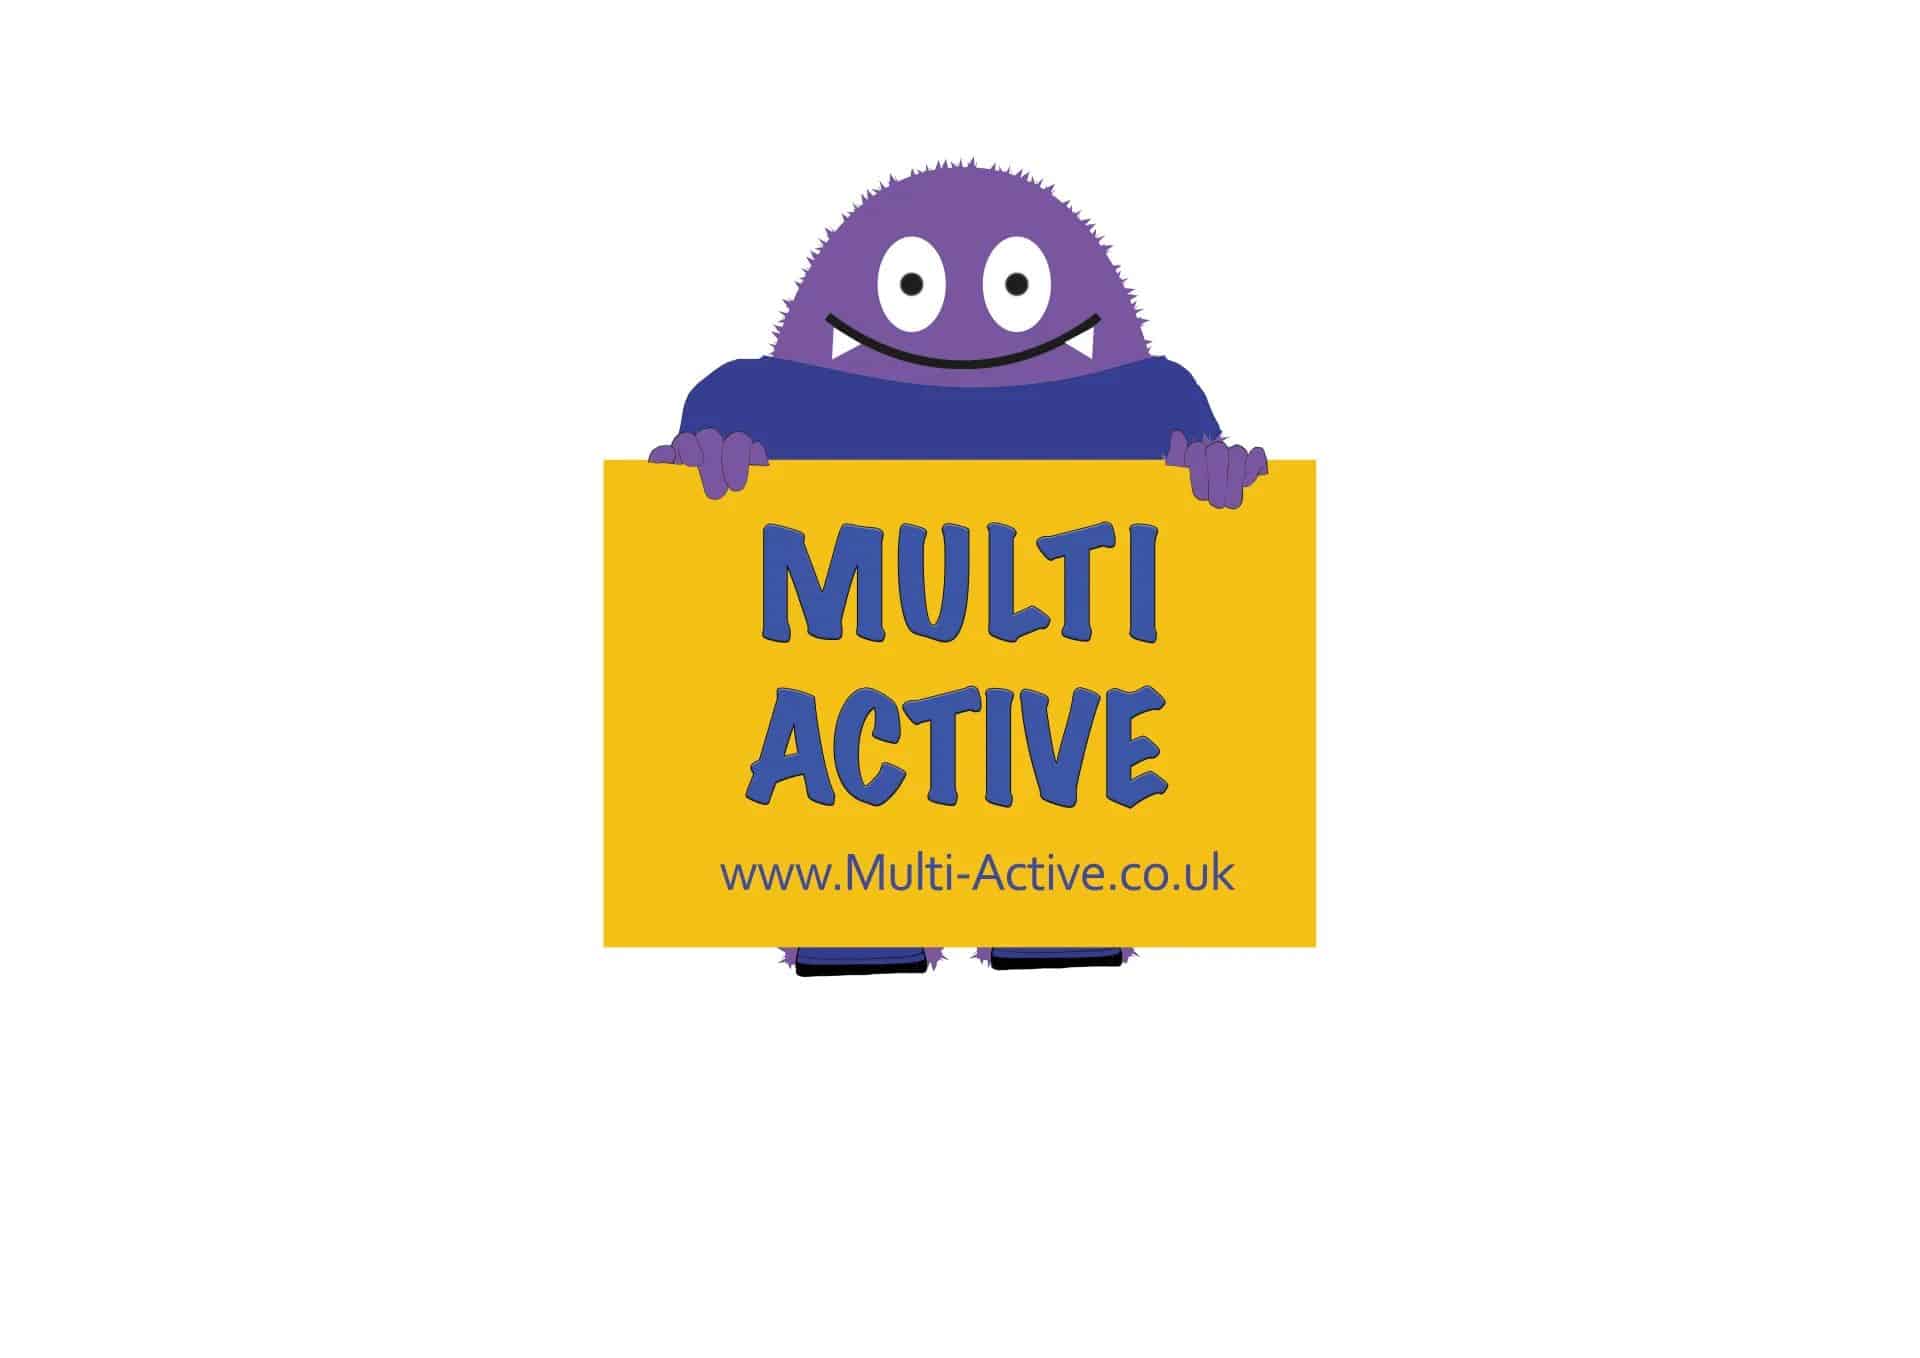 Image of the logo of Multi-Active